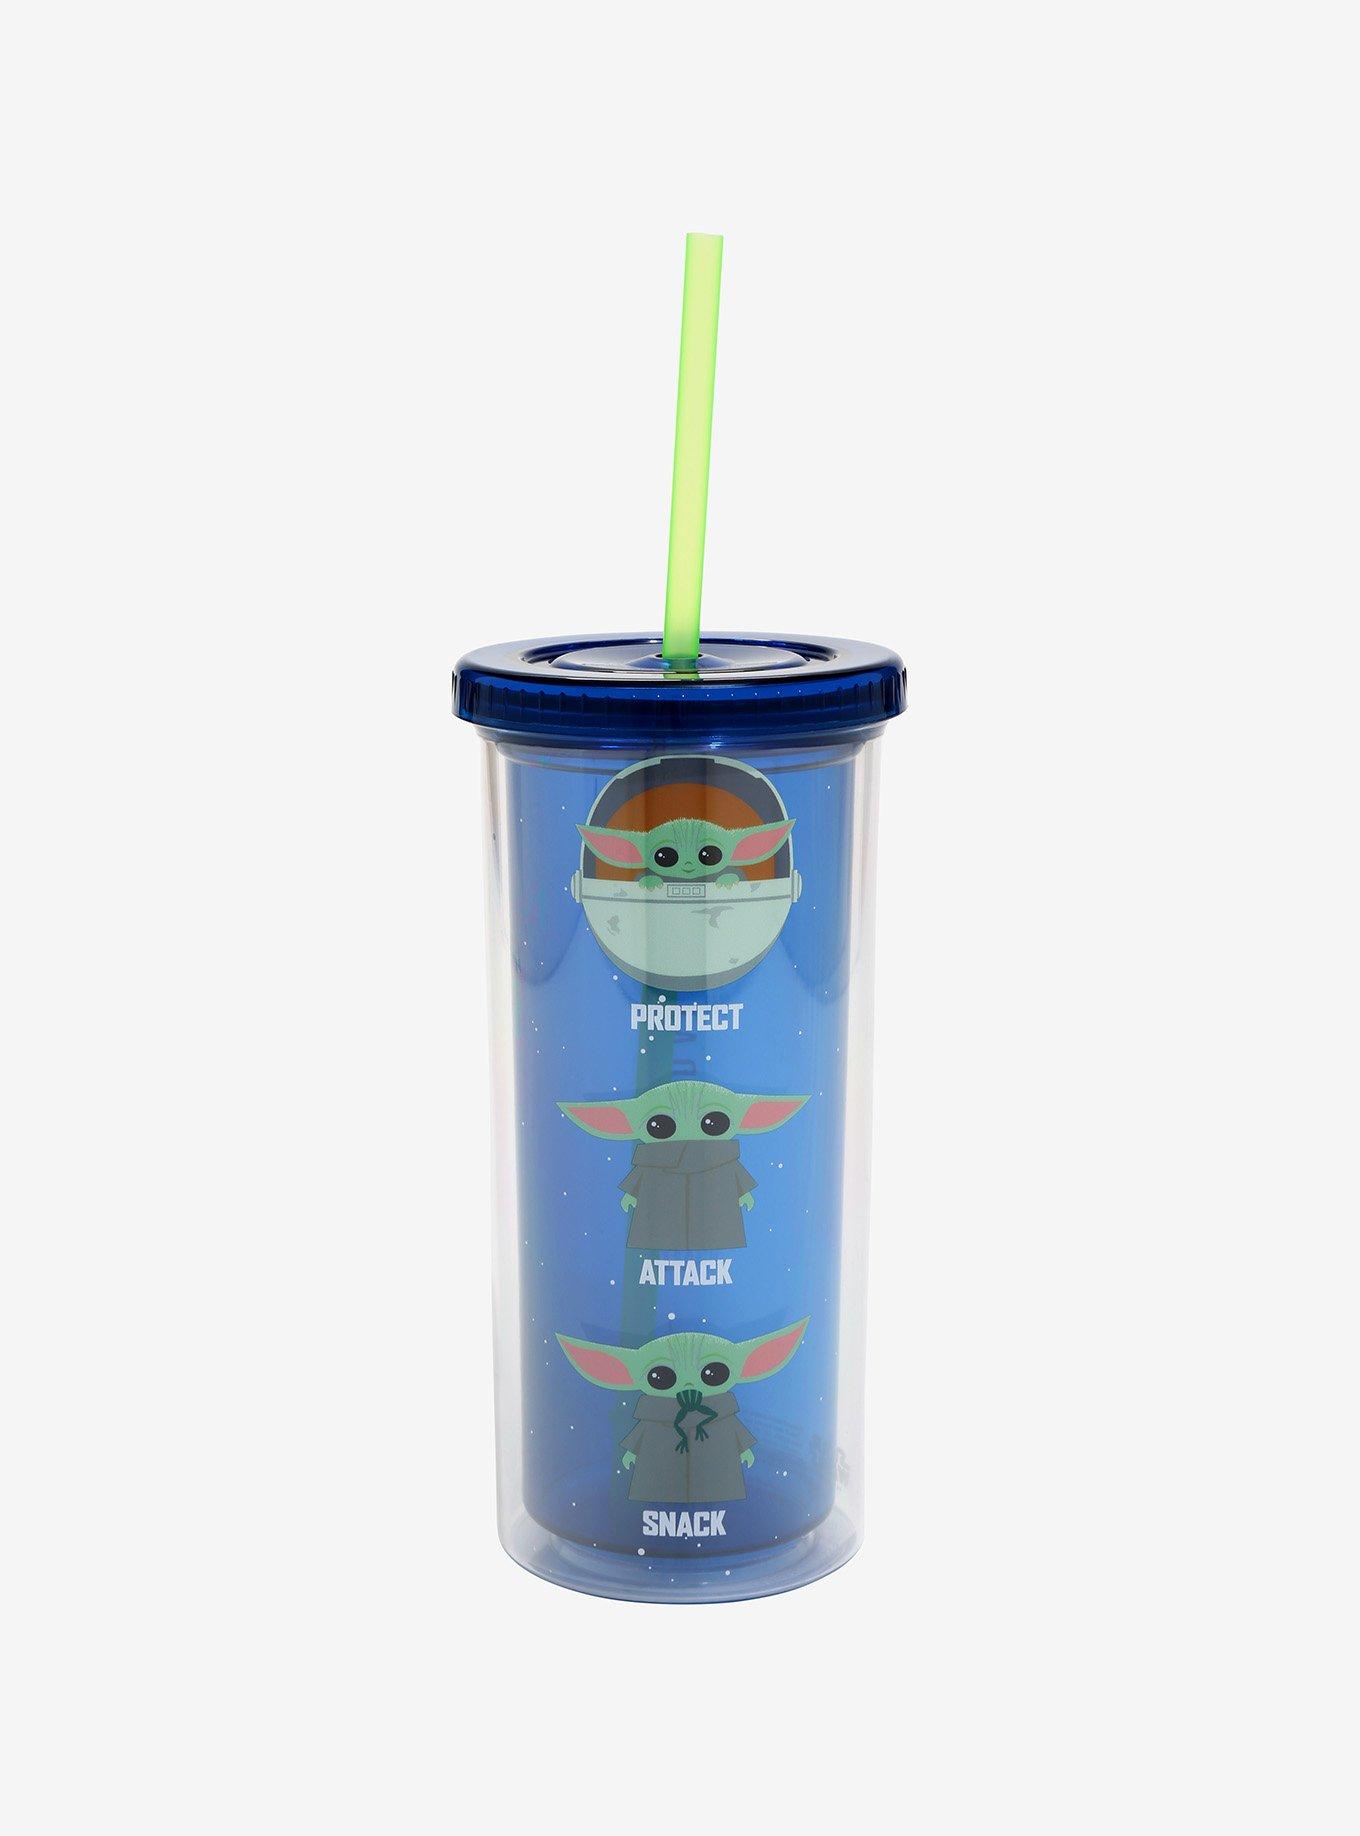 Star Wars The Mandalorian Protect, Attack, Snack Carnival Cup, , hi-res